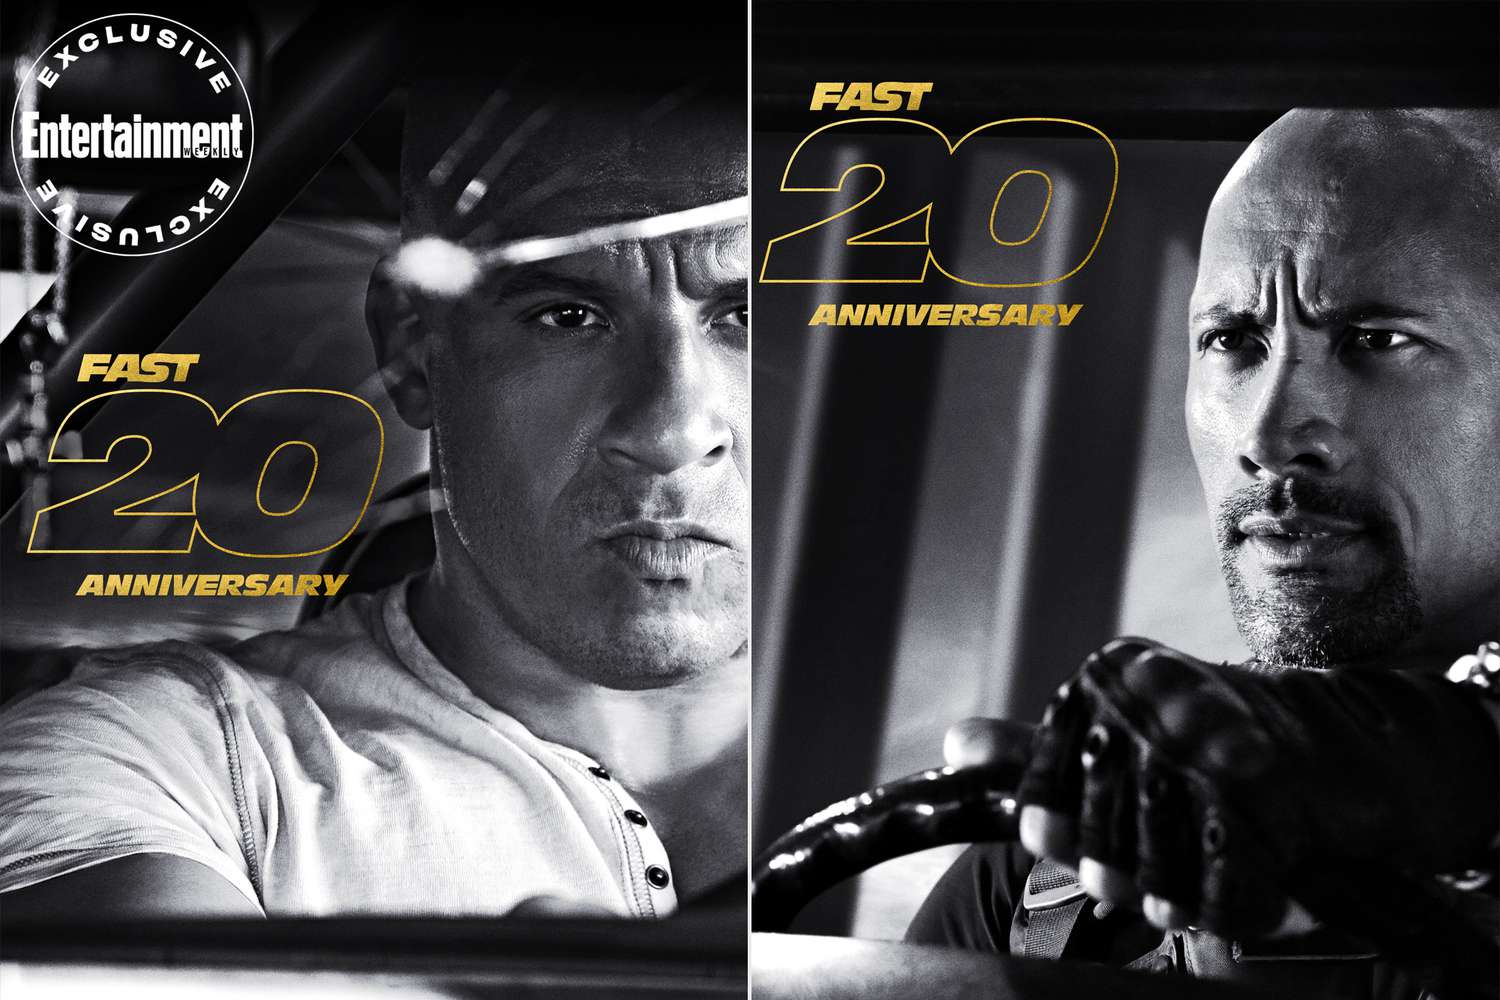 Vin Diesel, Dwayne Johnson, rest of 'Fast' family strap in for 20th anniversary posters - EW.com